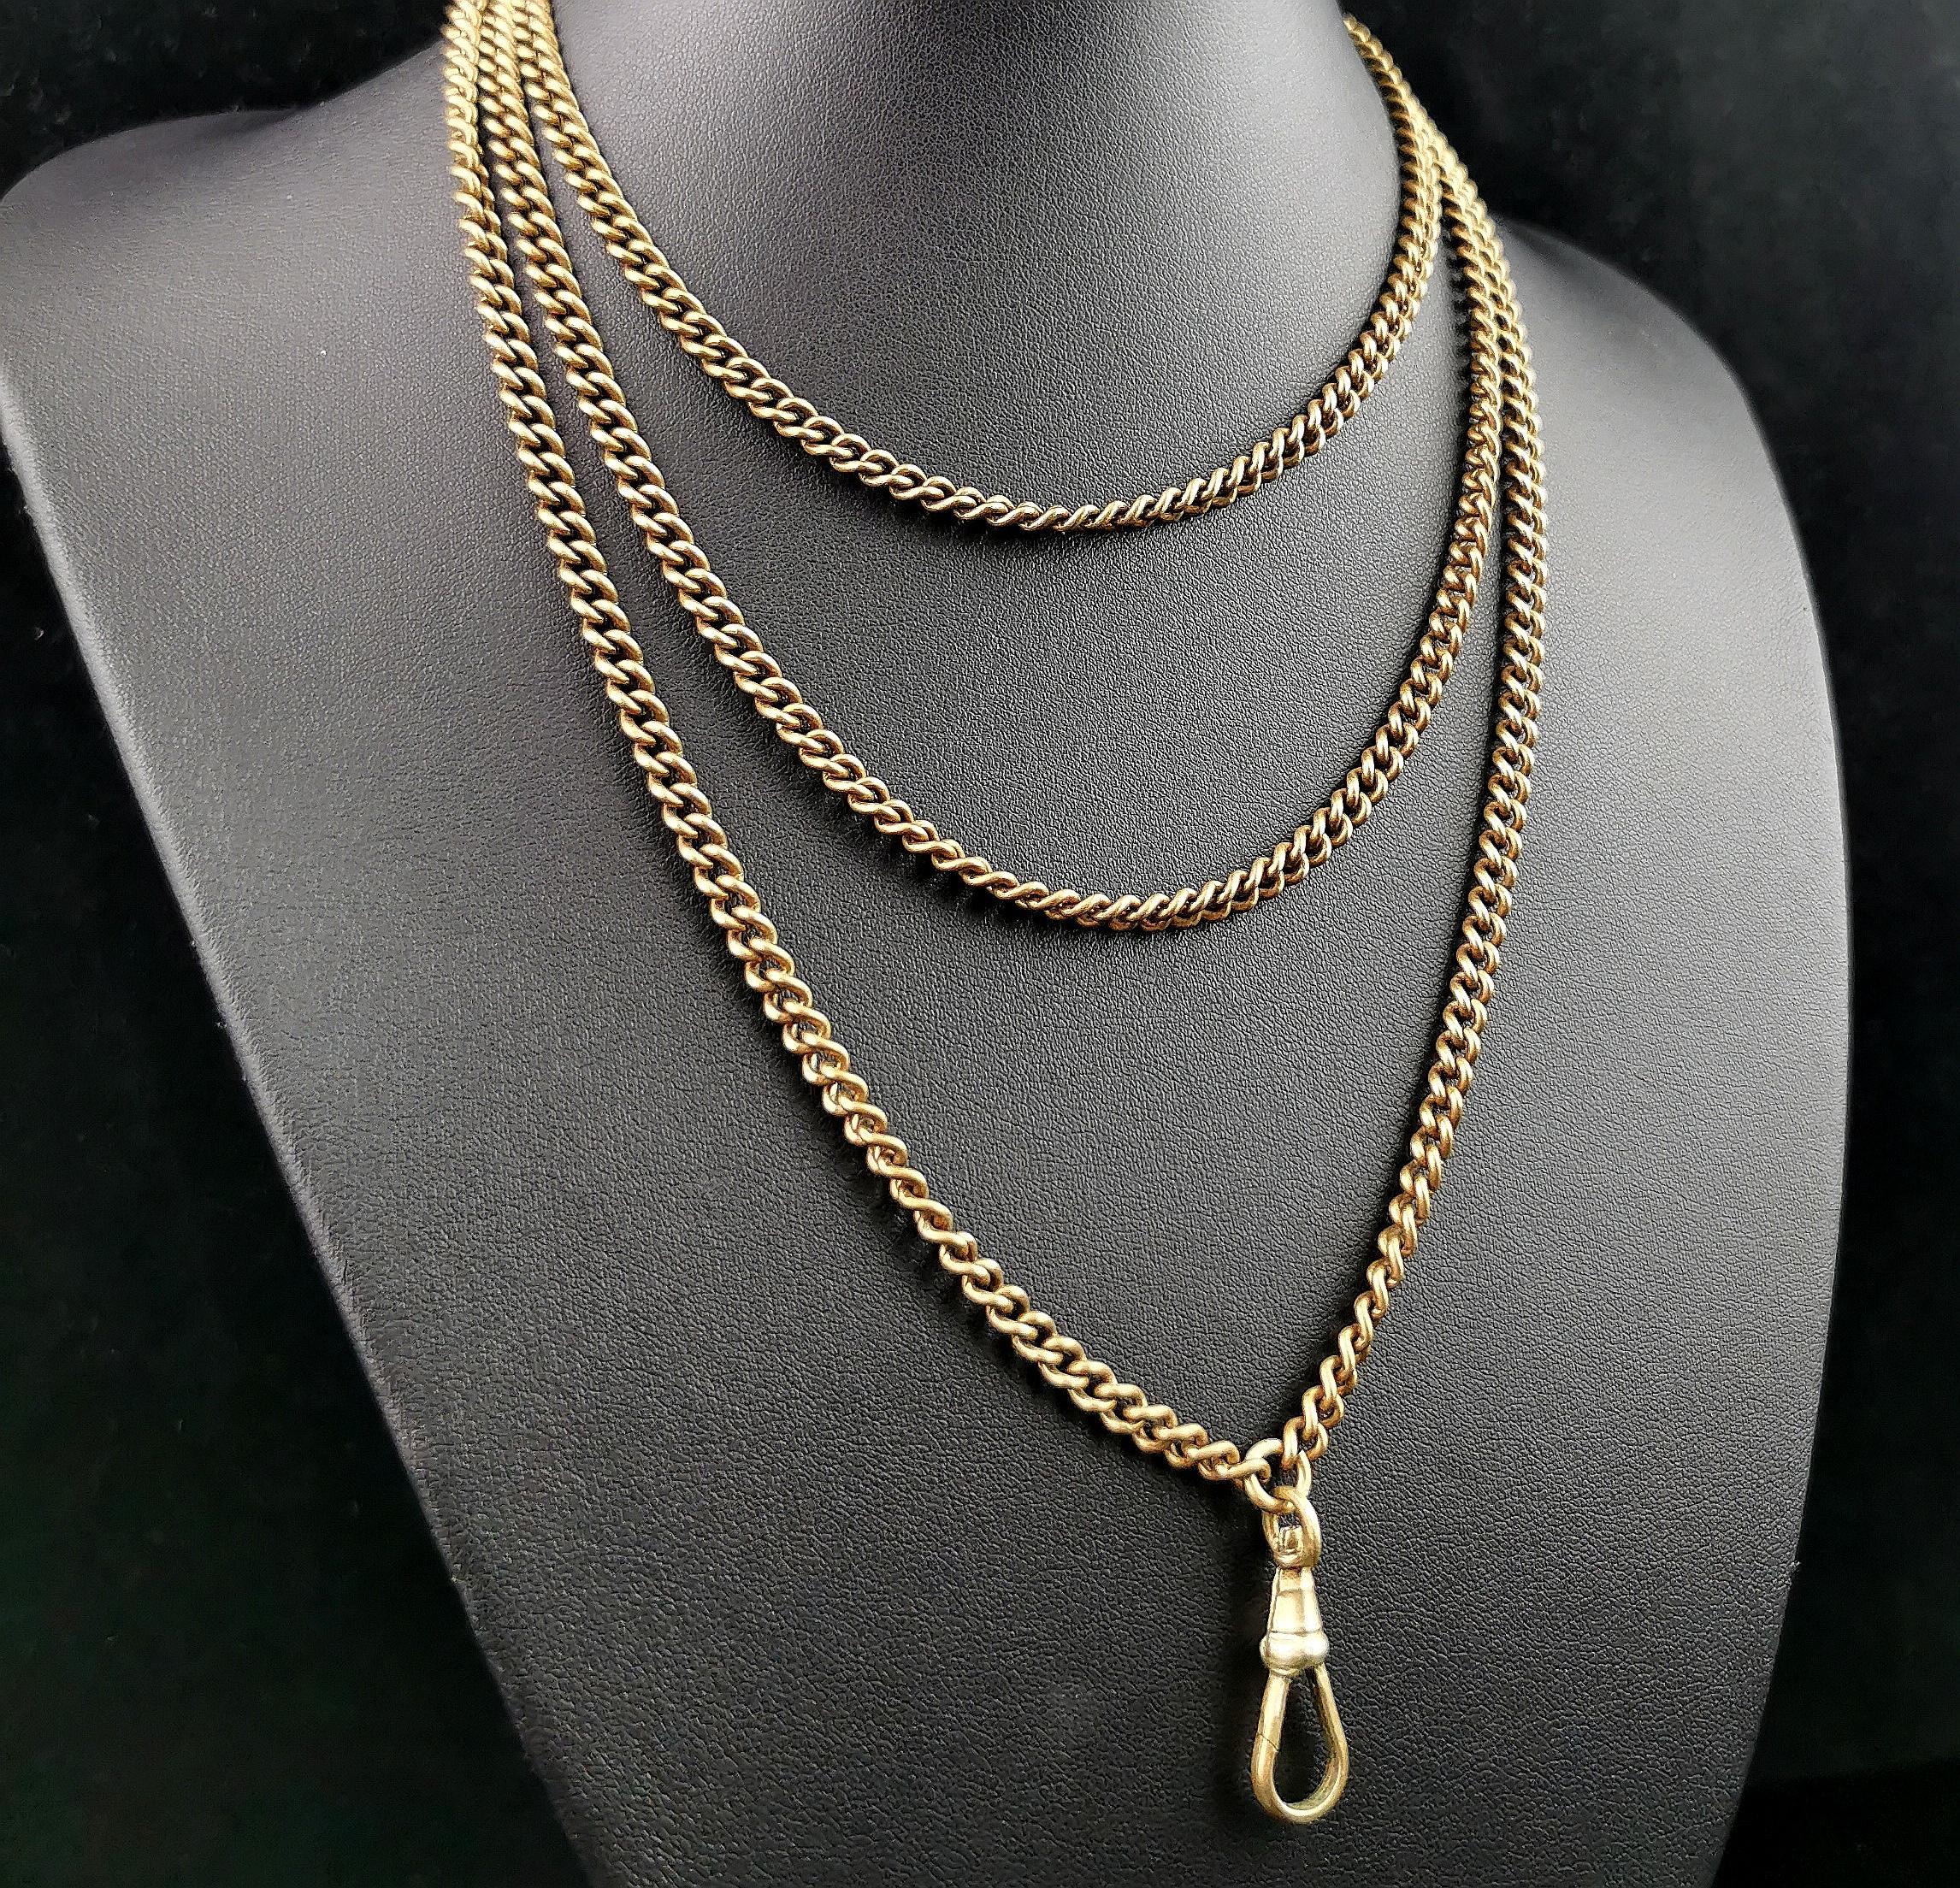 Antique Victorian longuard chain necklace, Gold plated, Curb link  10